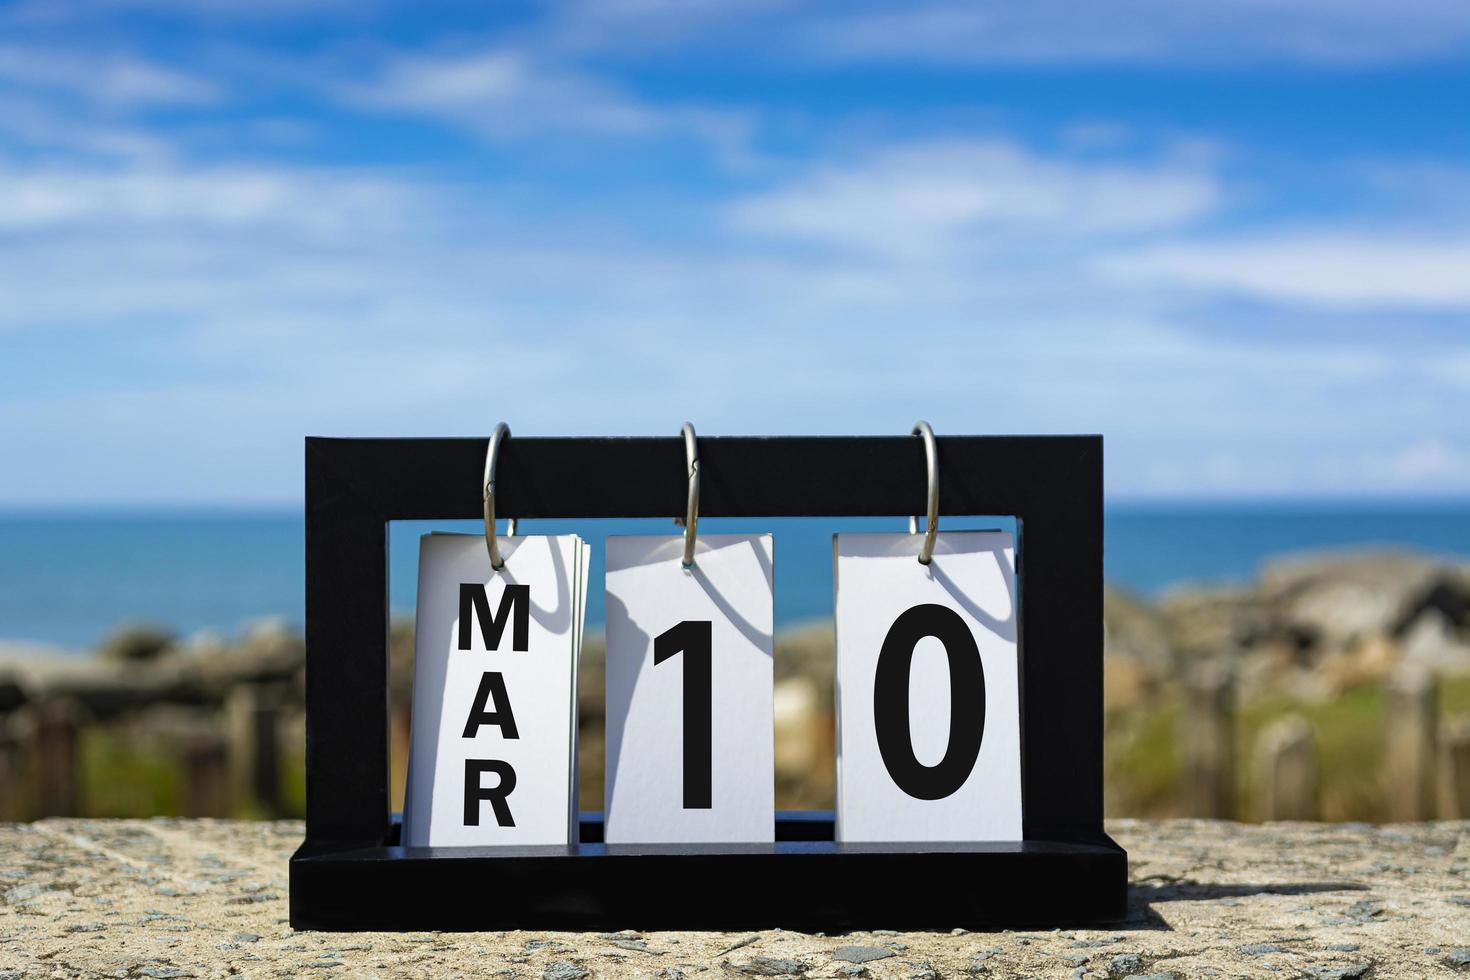 Mar 10 calendar date text on wooden frame with blurred background of ocean photo